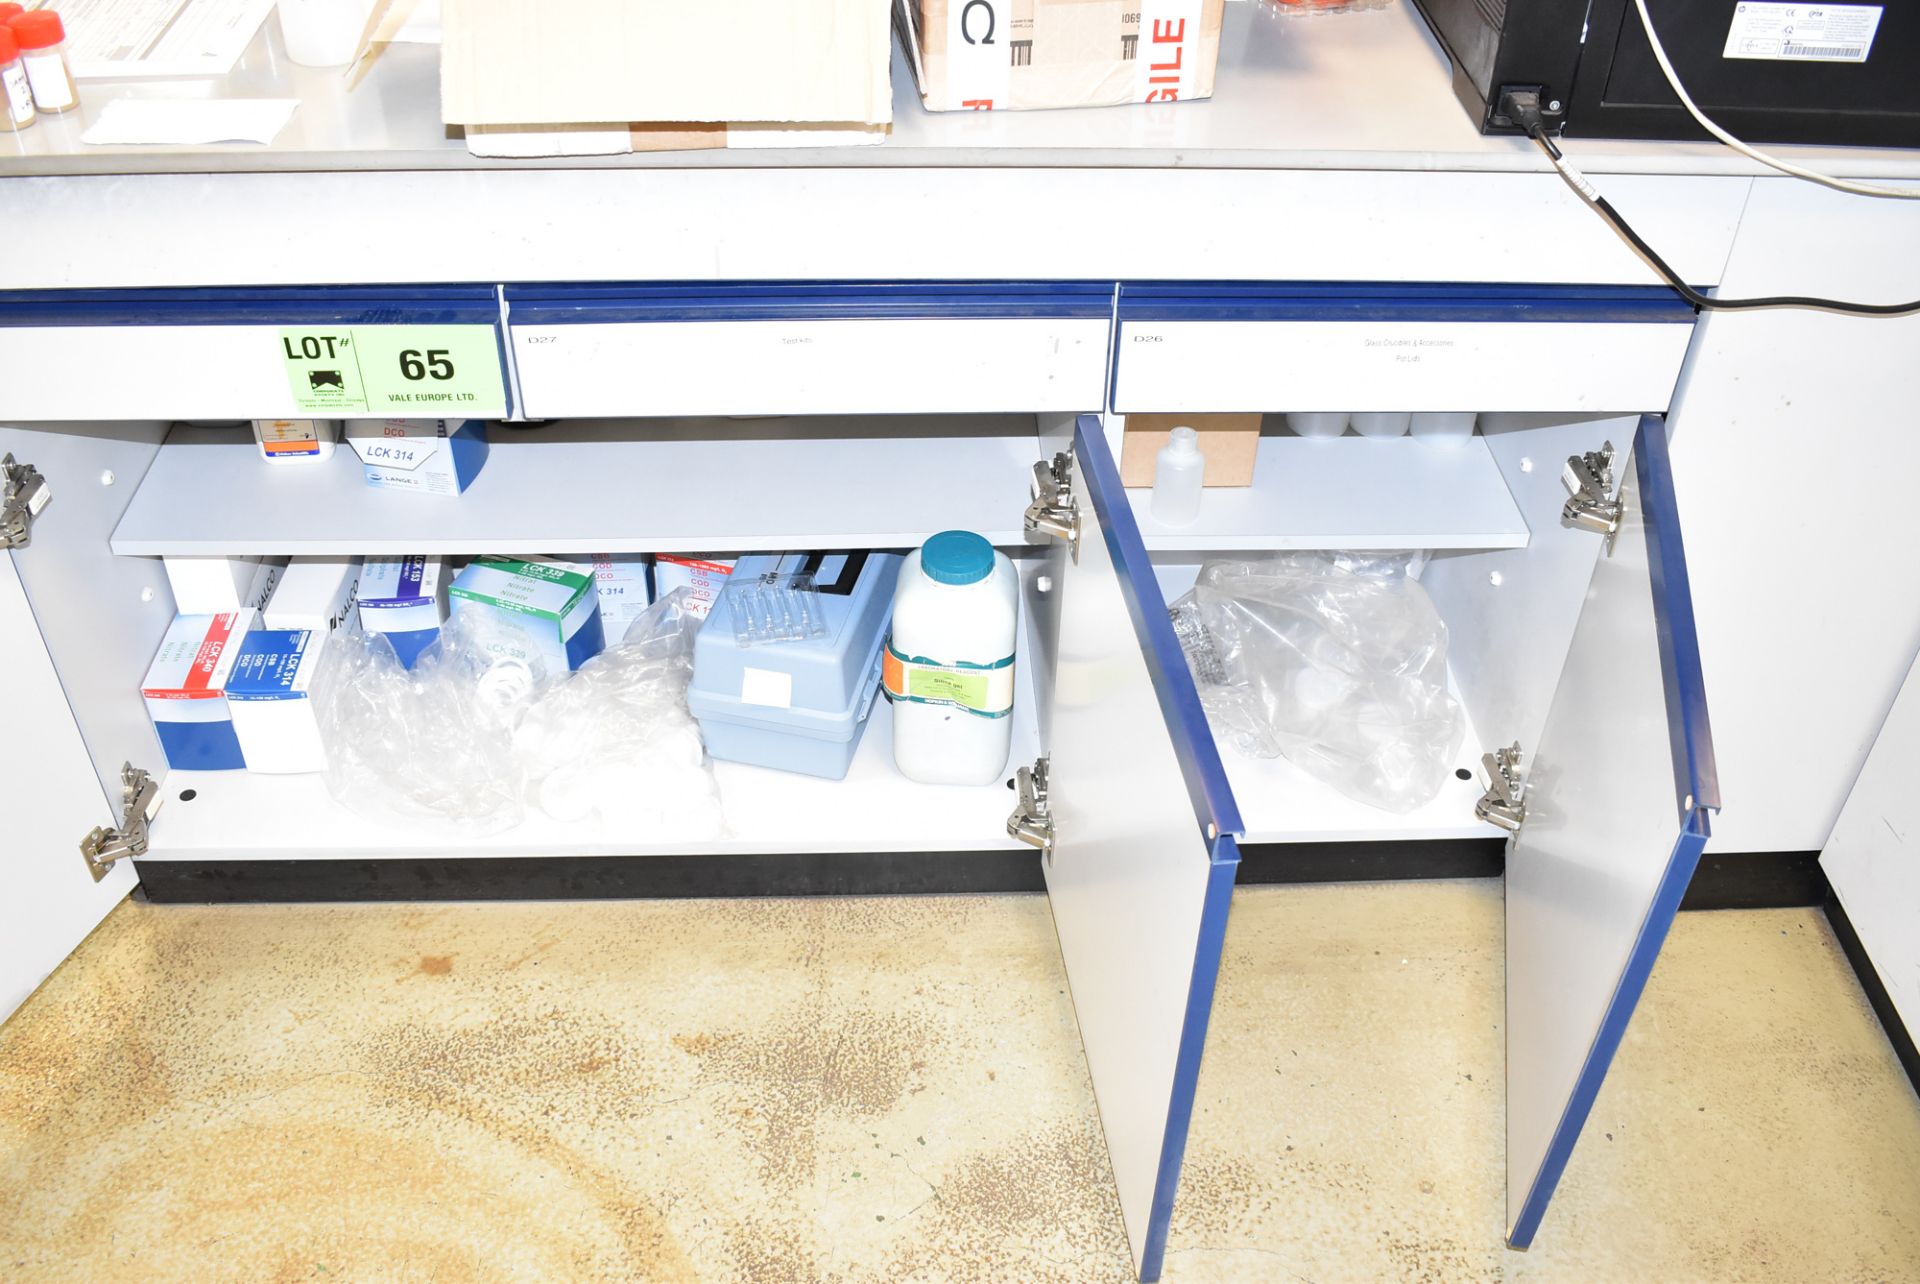 LOT/ 3 SECTION LAB STORAGE CABINET WITH CONTENTS - TEST KITS, GLASSWARE, PLASTIC PODS (ROOM 264) [ - Image 3 of 3